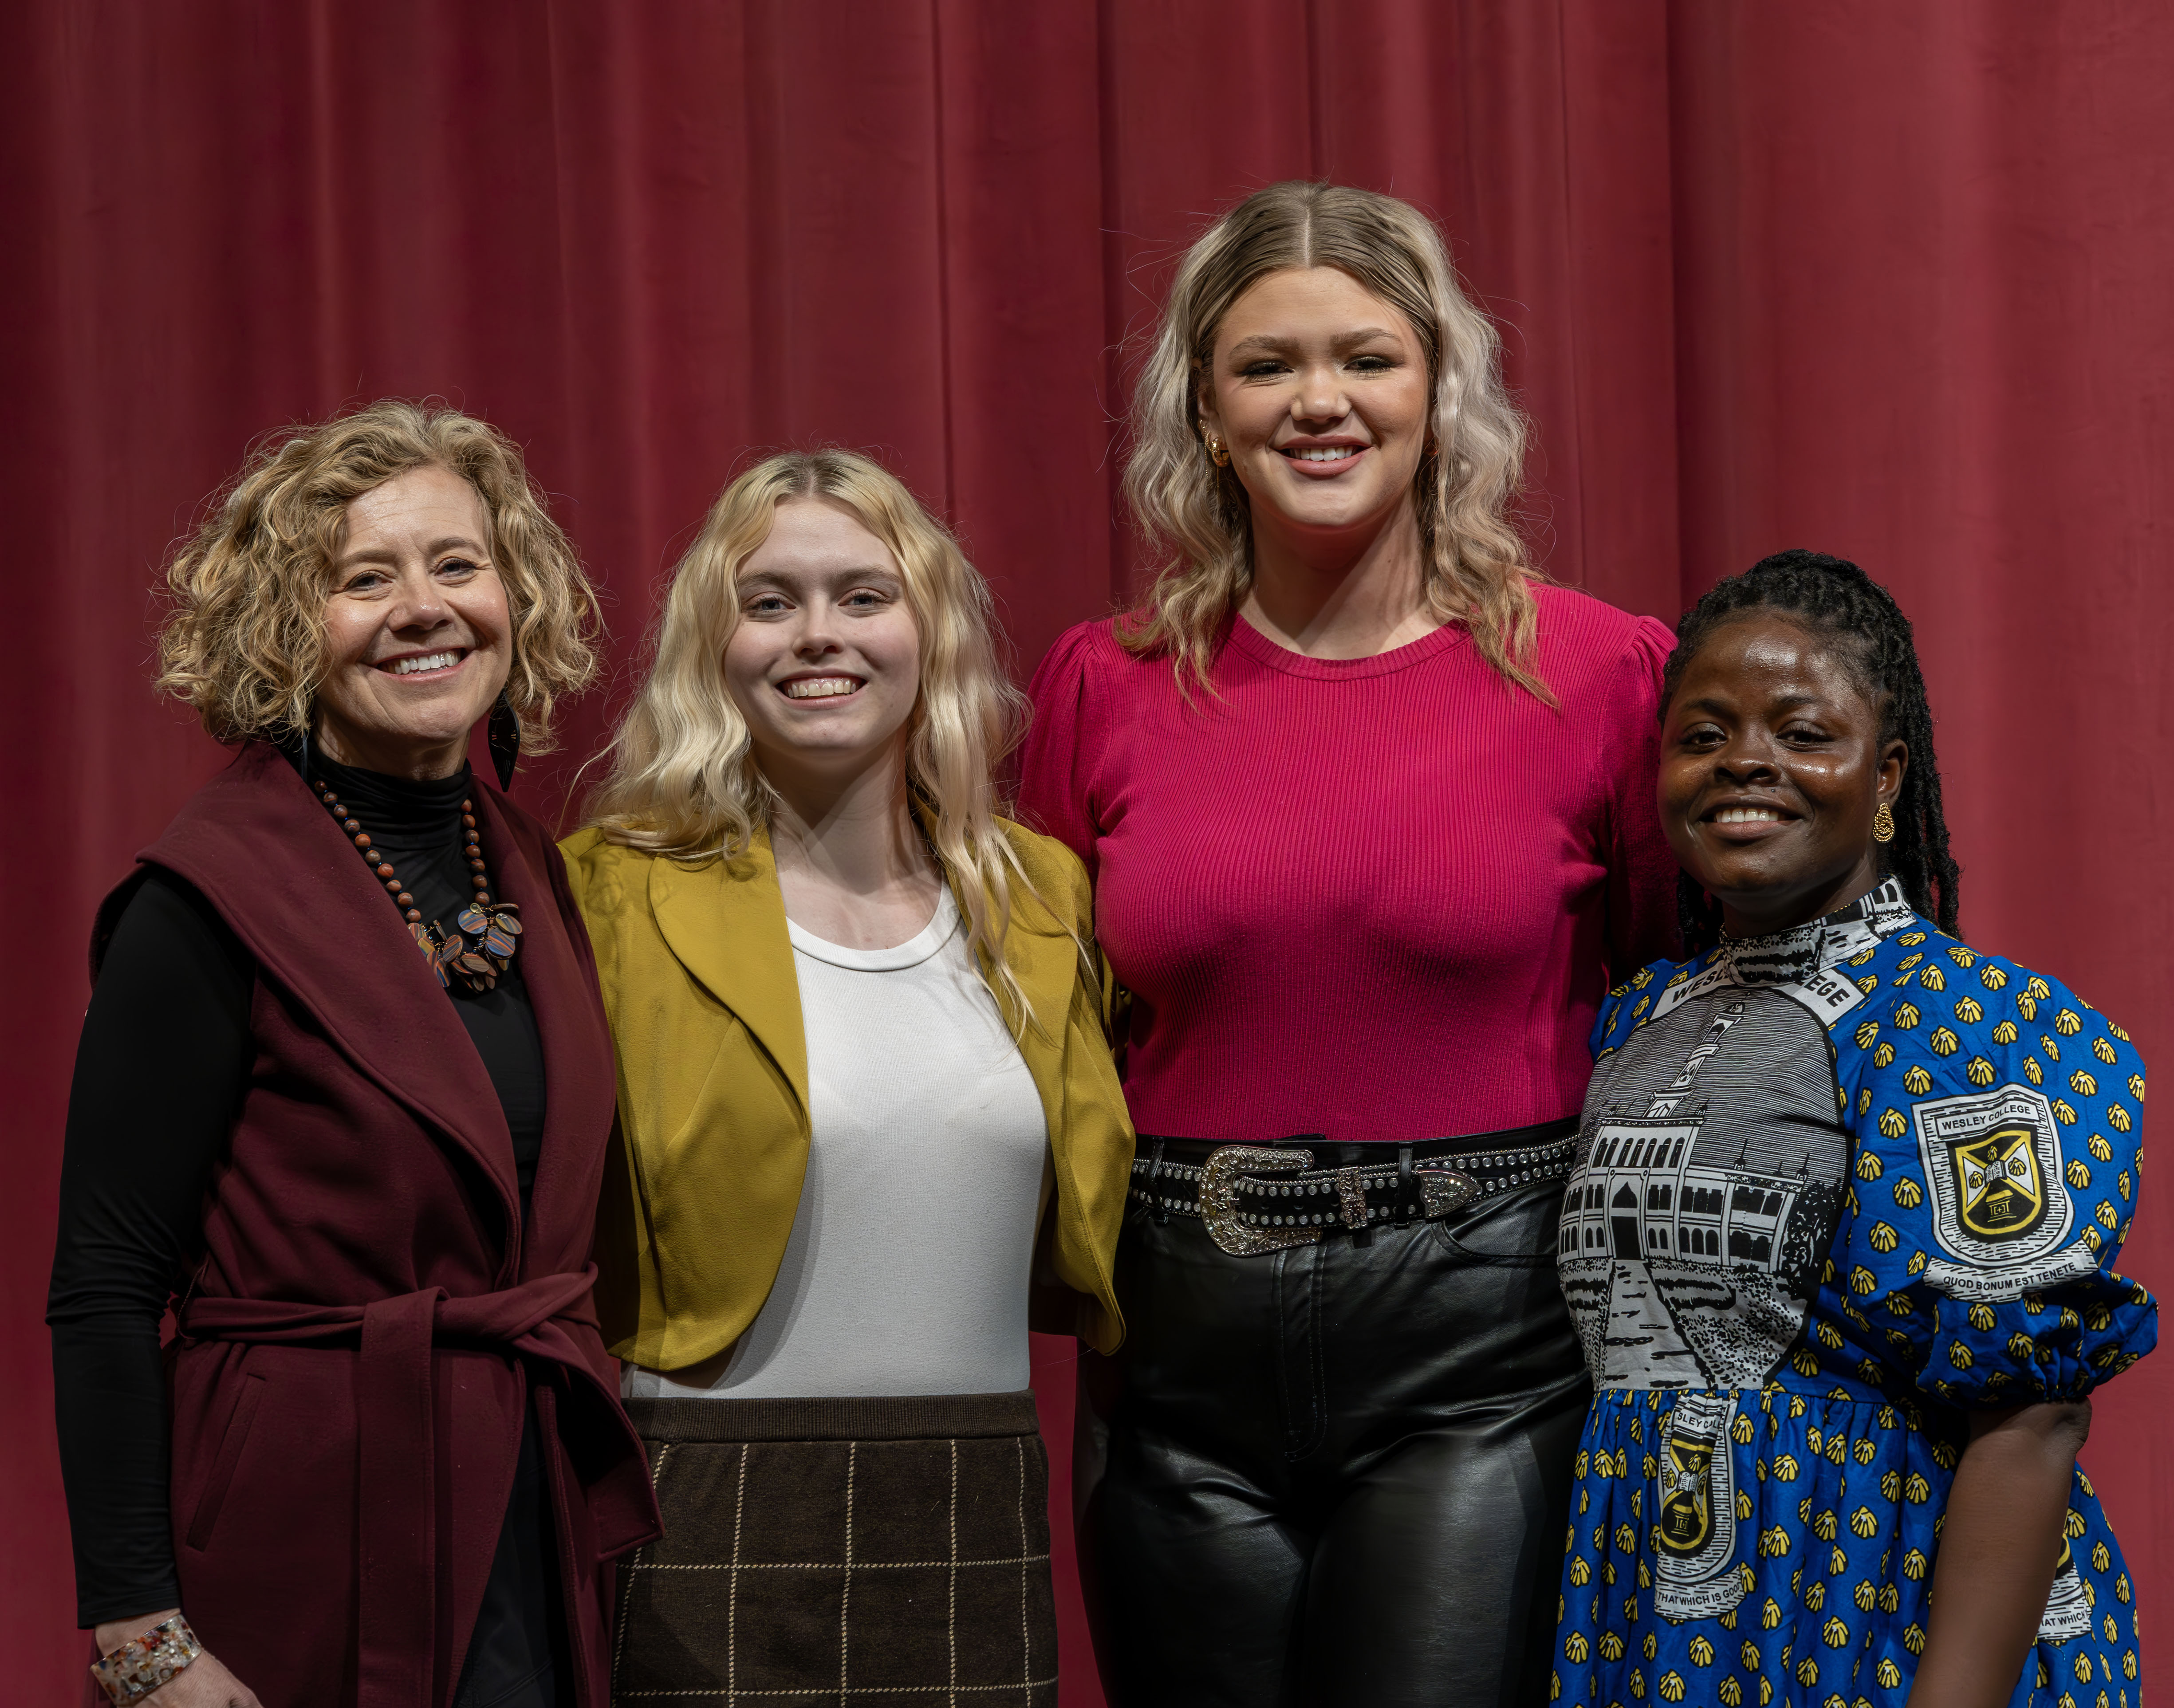 PTK Sponsor and Speech Professor Elizabeth Grant (left) with “You Have a Voice!” winner, Belle Blackorby; second-place finisher, Madeline Bouillon and third-place contestant, T.K. Queenster. James Pepper, L&C Marketing/PR.